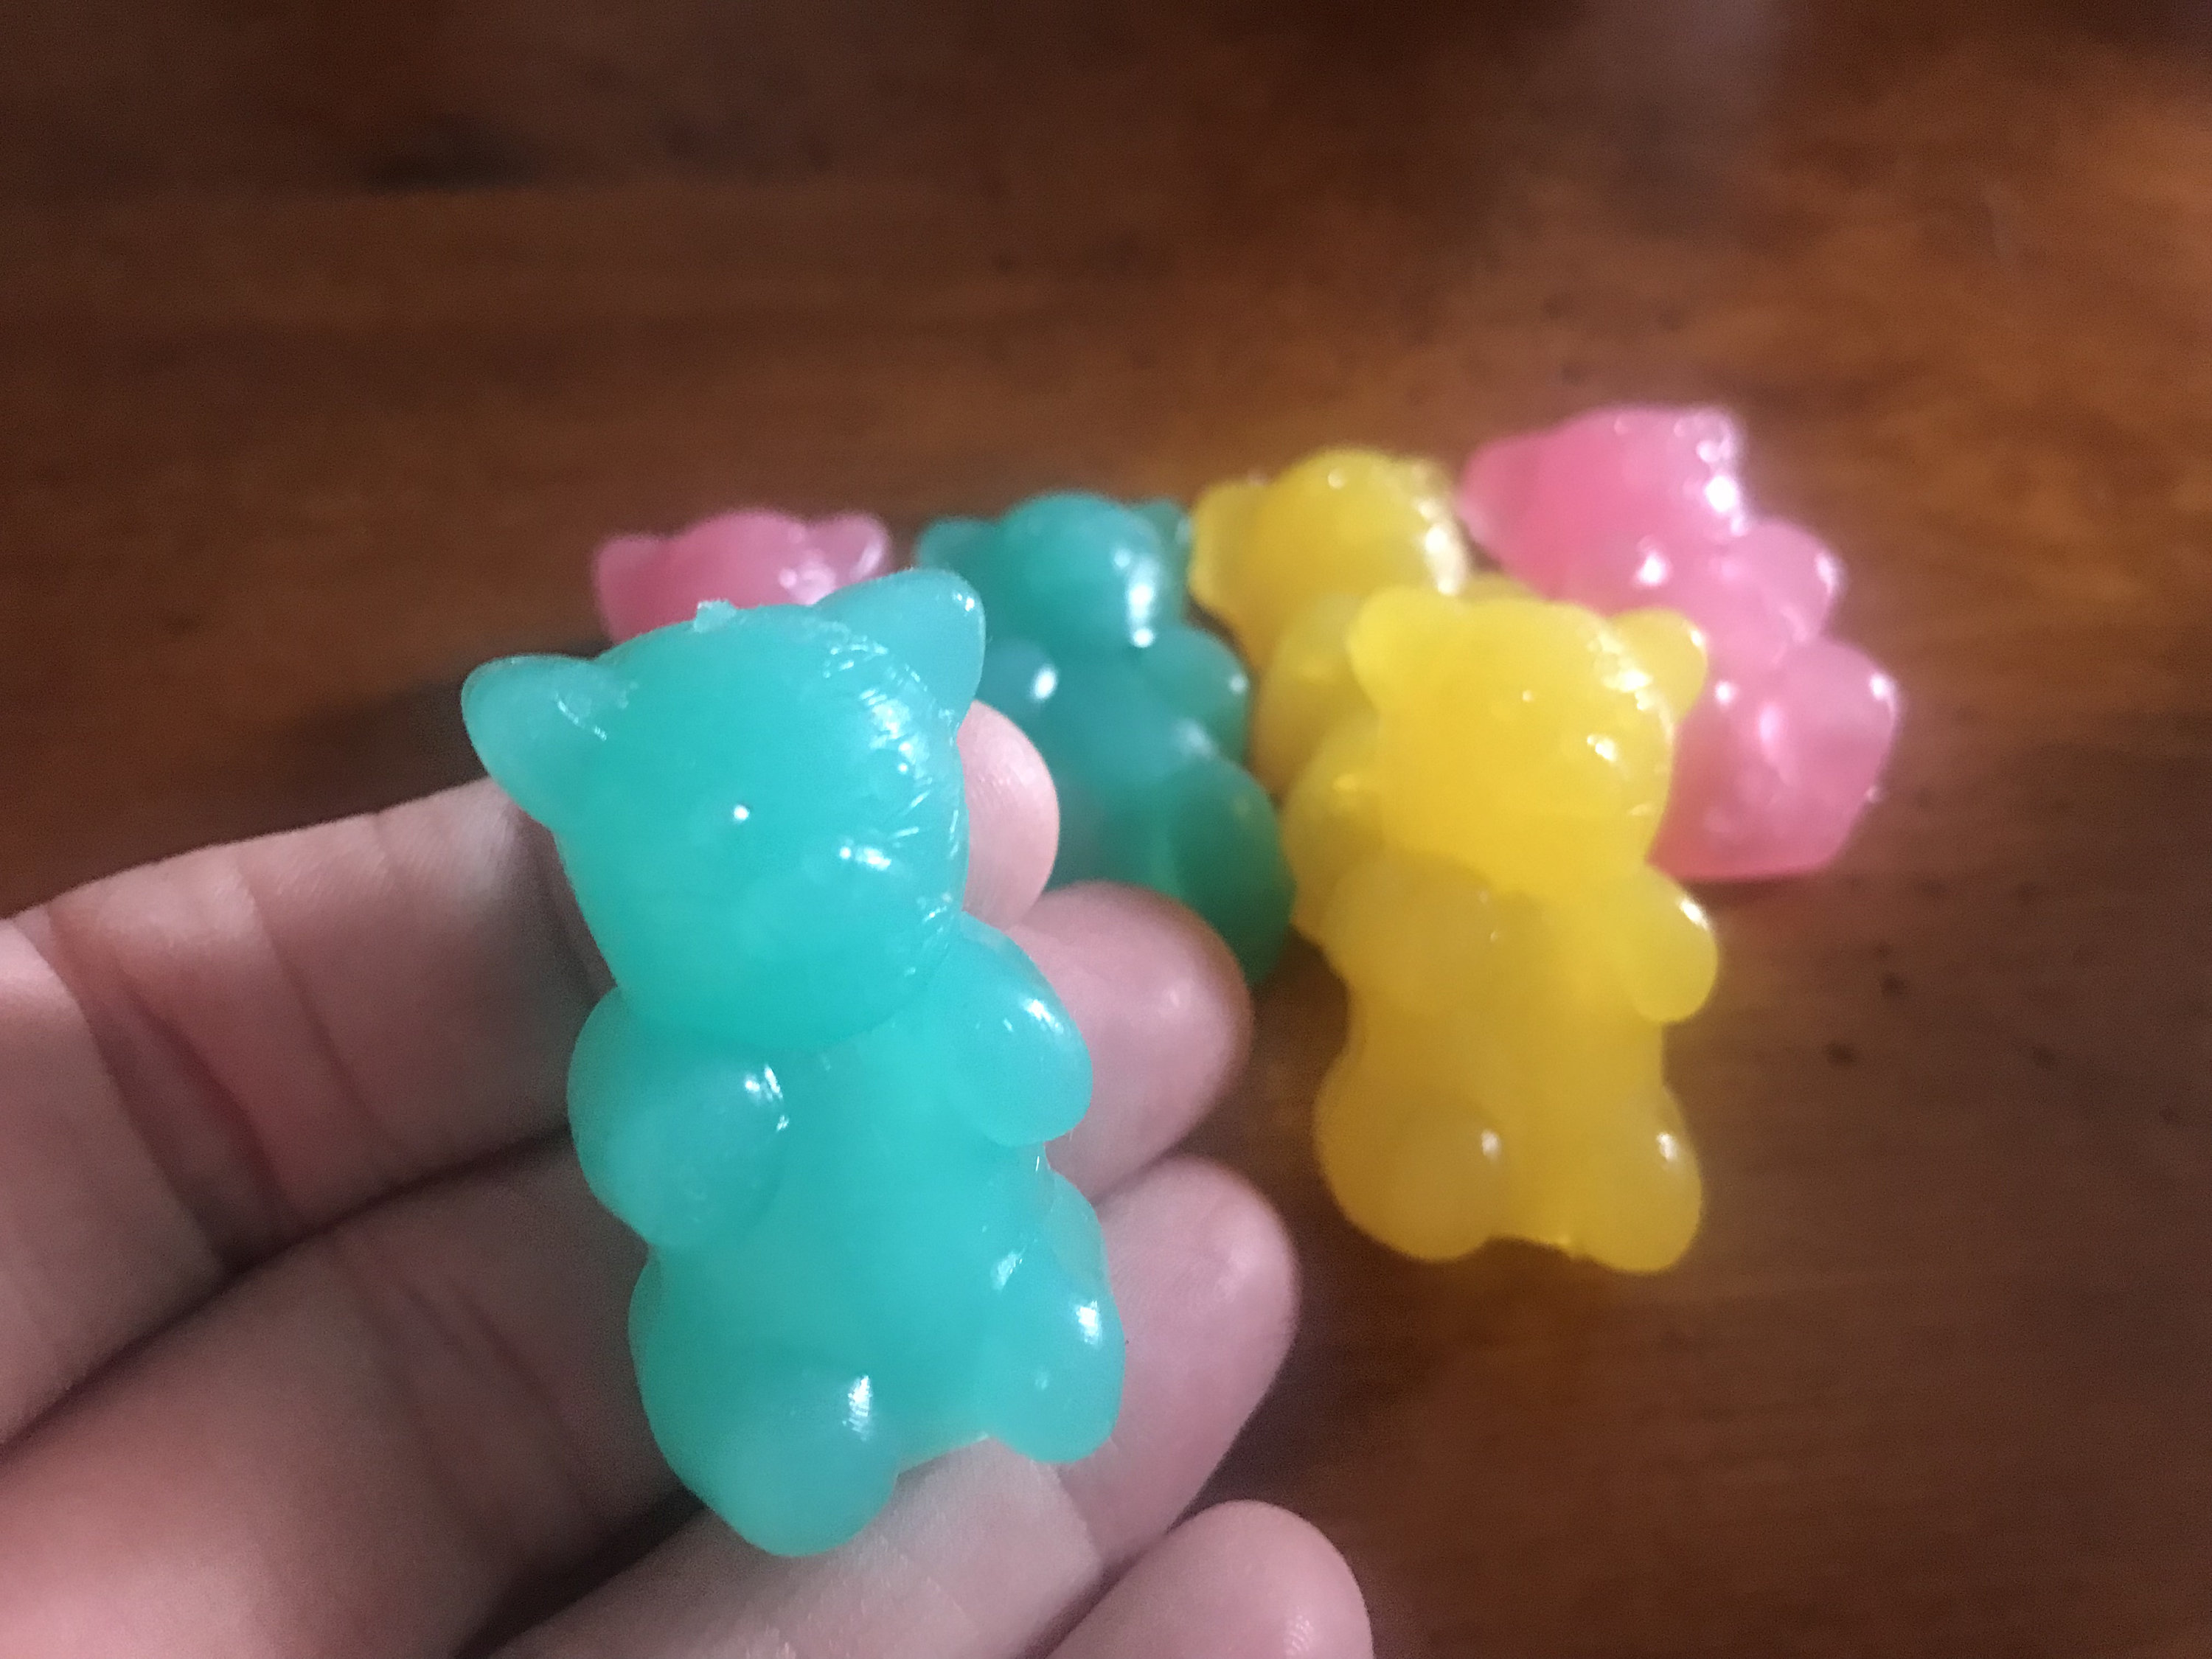 Deliteful Boutique - Gummy Bears has arrived 🧸 which colour gummy bear is  your fave? #gummybears #gummybear #squishyshop #squishy #squishies  #gummybearsquishy #ibloom #ibloomsquishy #kawaii #cutesquishy #bearsquishy